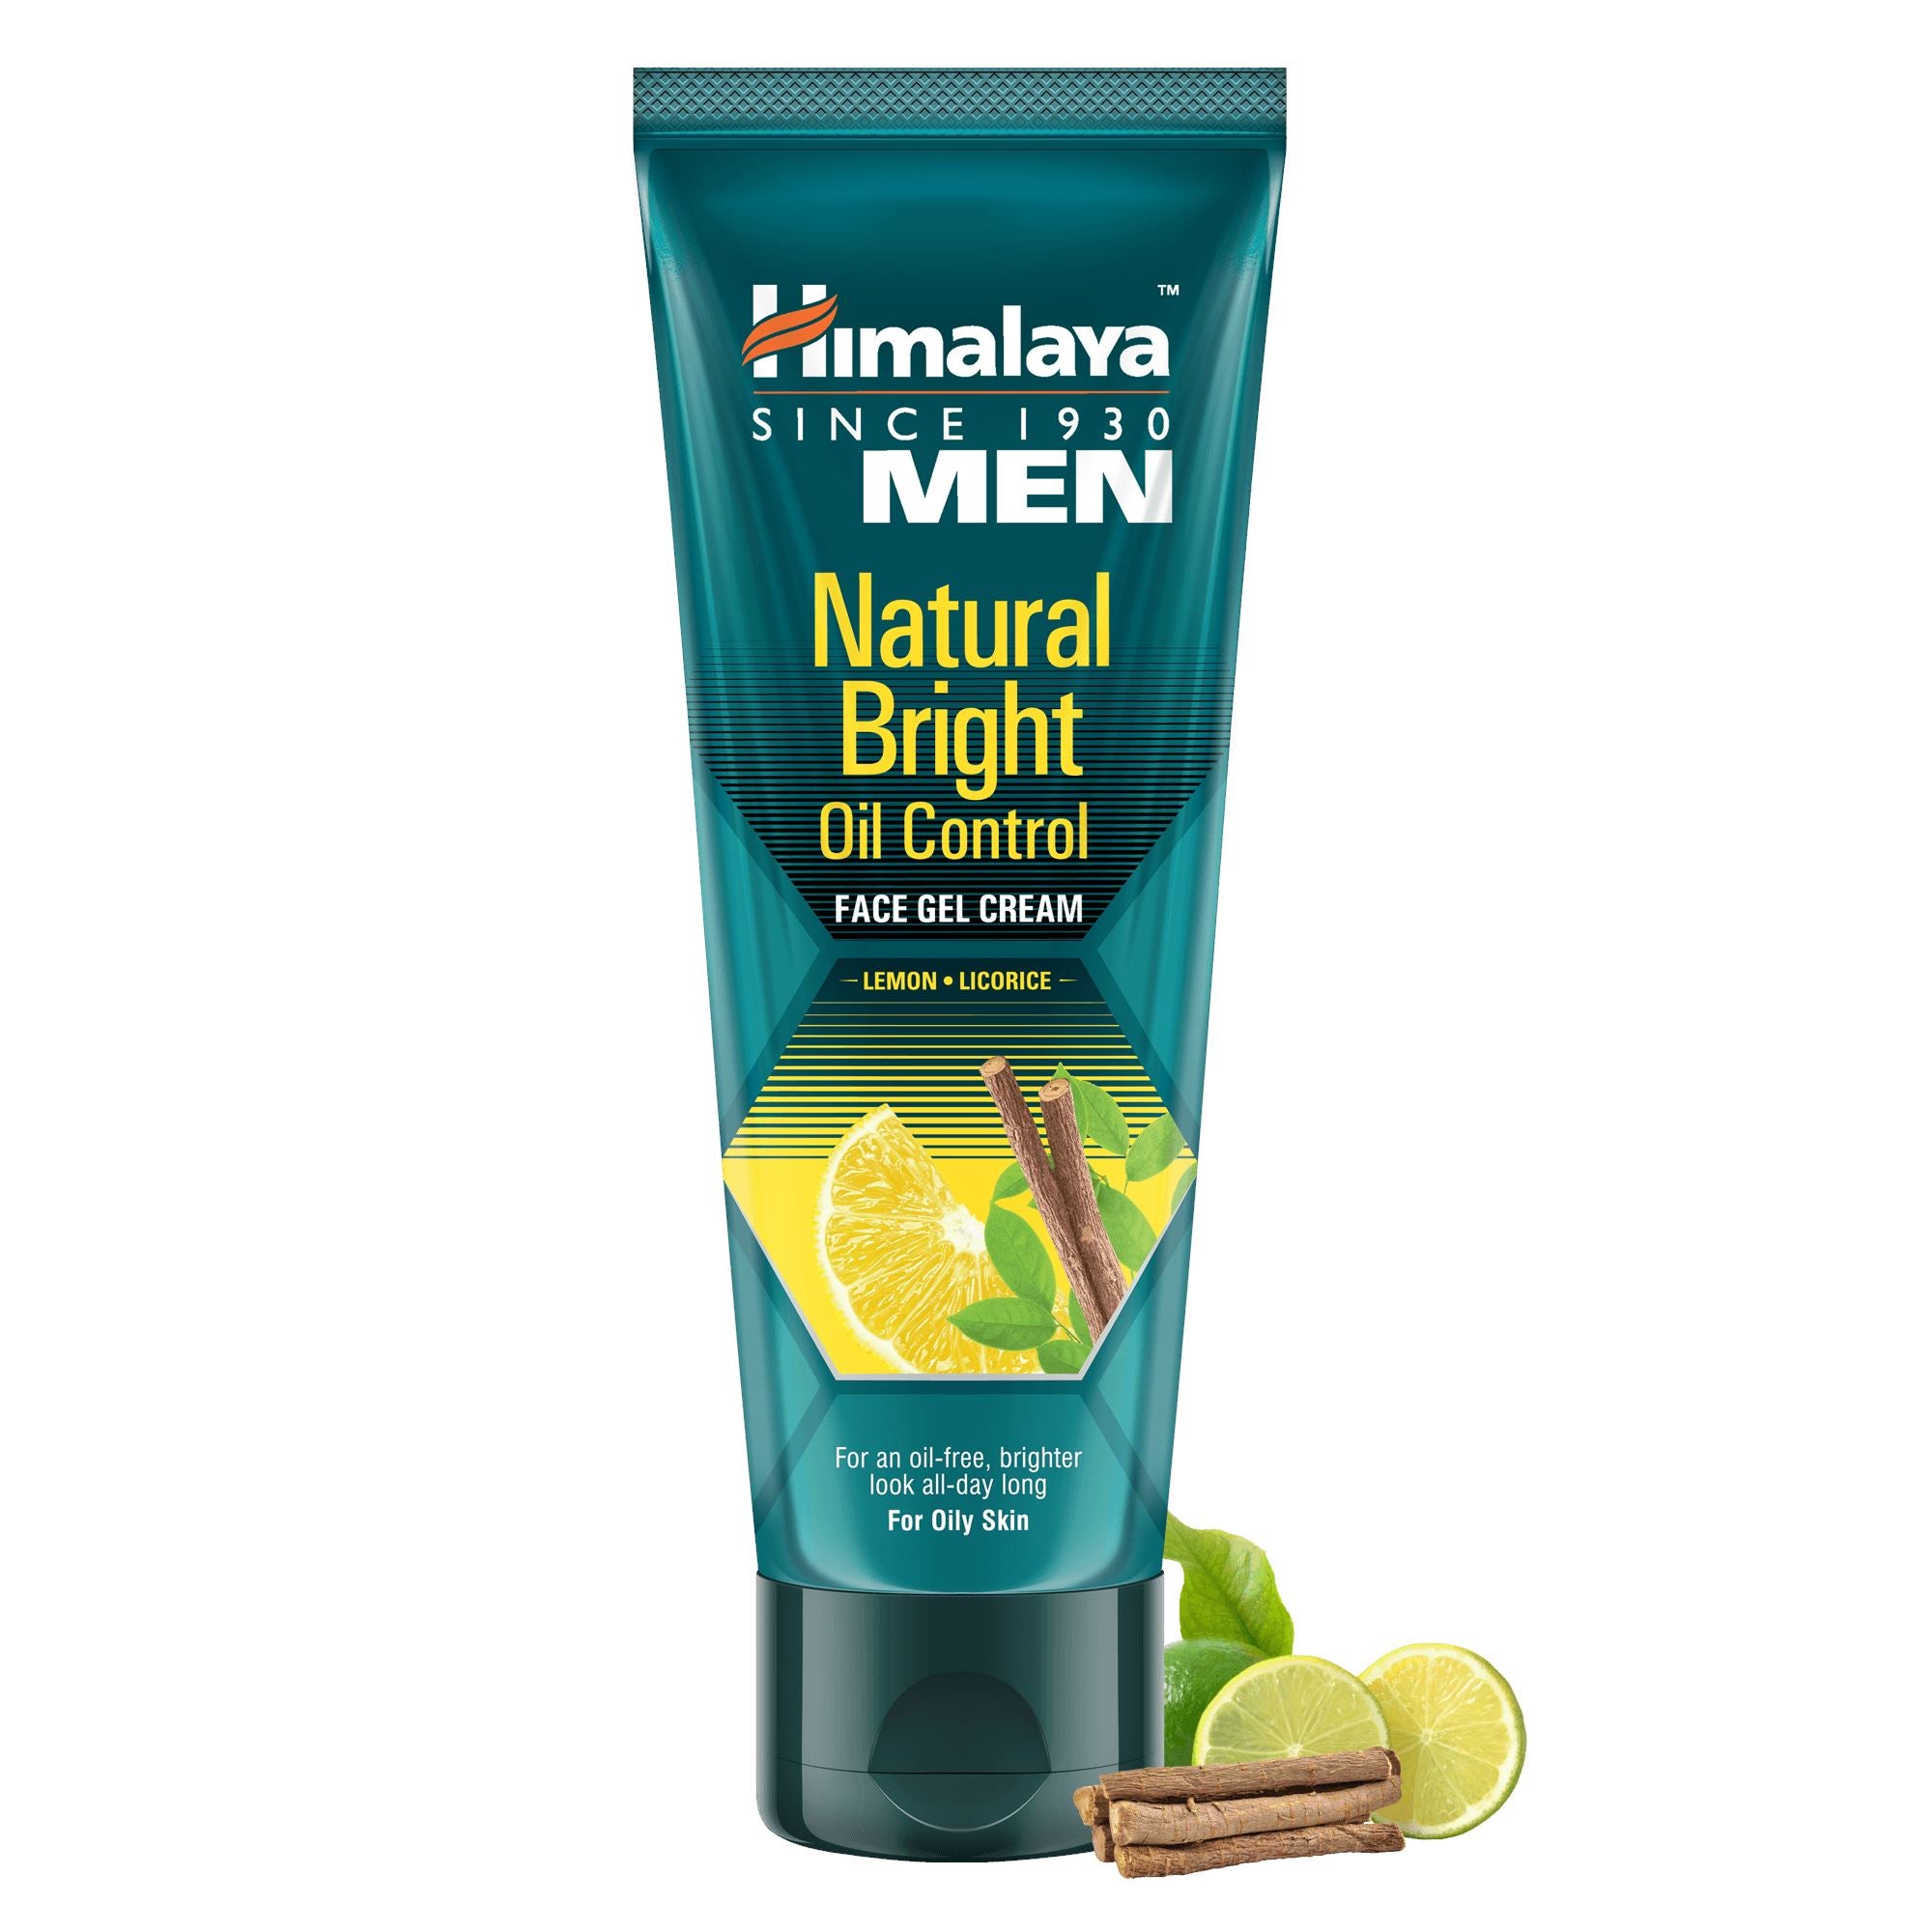 Himalaya Natural Bright Oil Control Men’s Face Cream - For an oil-free, brighter look all day long